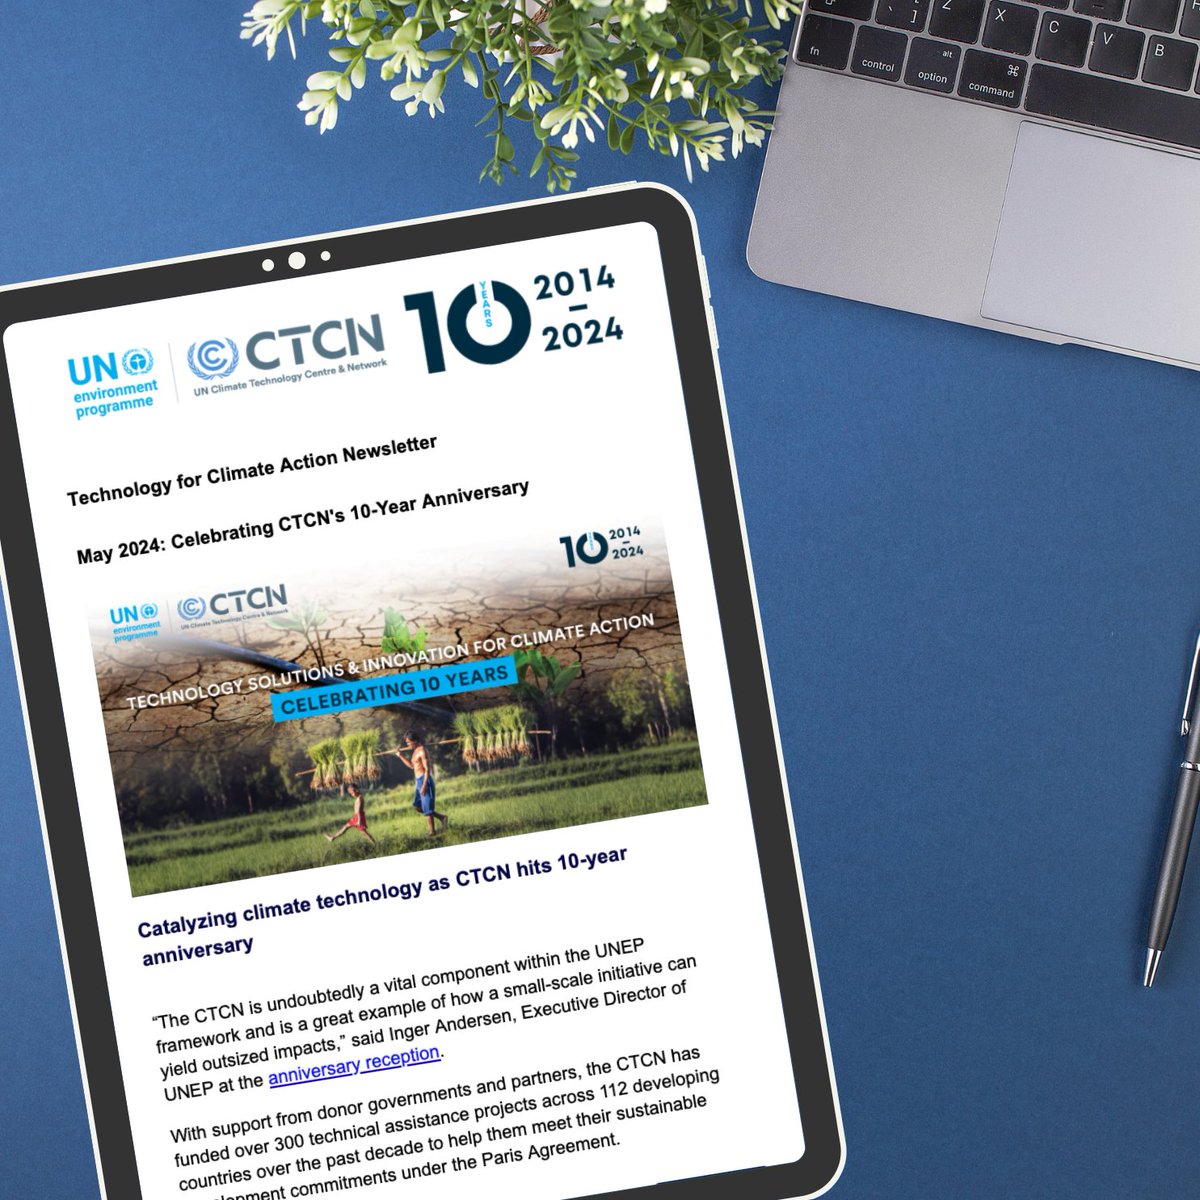 📢 Check out the #CTCN Newsletter w/ updates on: 📌 CTCN's achievements over 10 years 📌 New Chair & Vice-Chair appointed for Advisory Board 👉 bit.ly/3WBd4Qx  to find more about the news 📰, resources 💰, and events  📅  from the #TechnologyMechanism community.